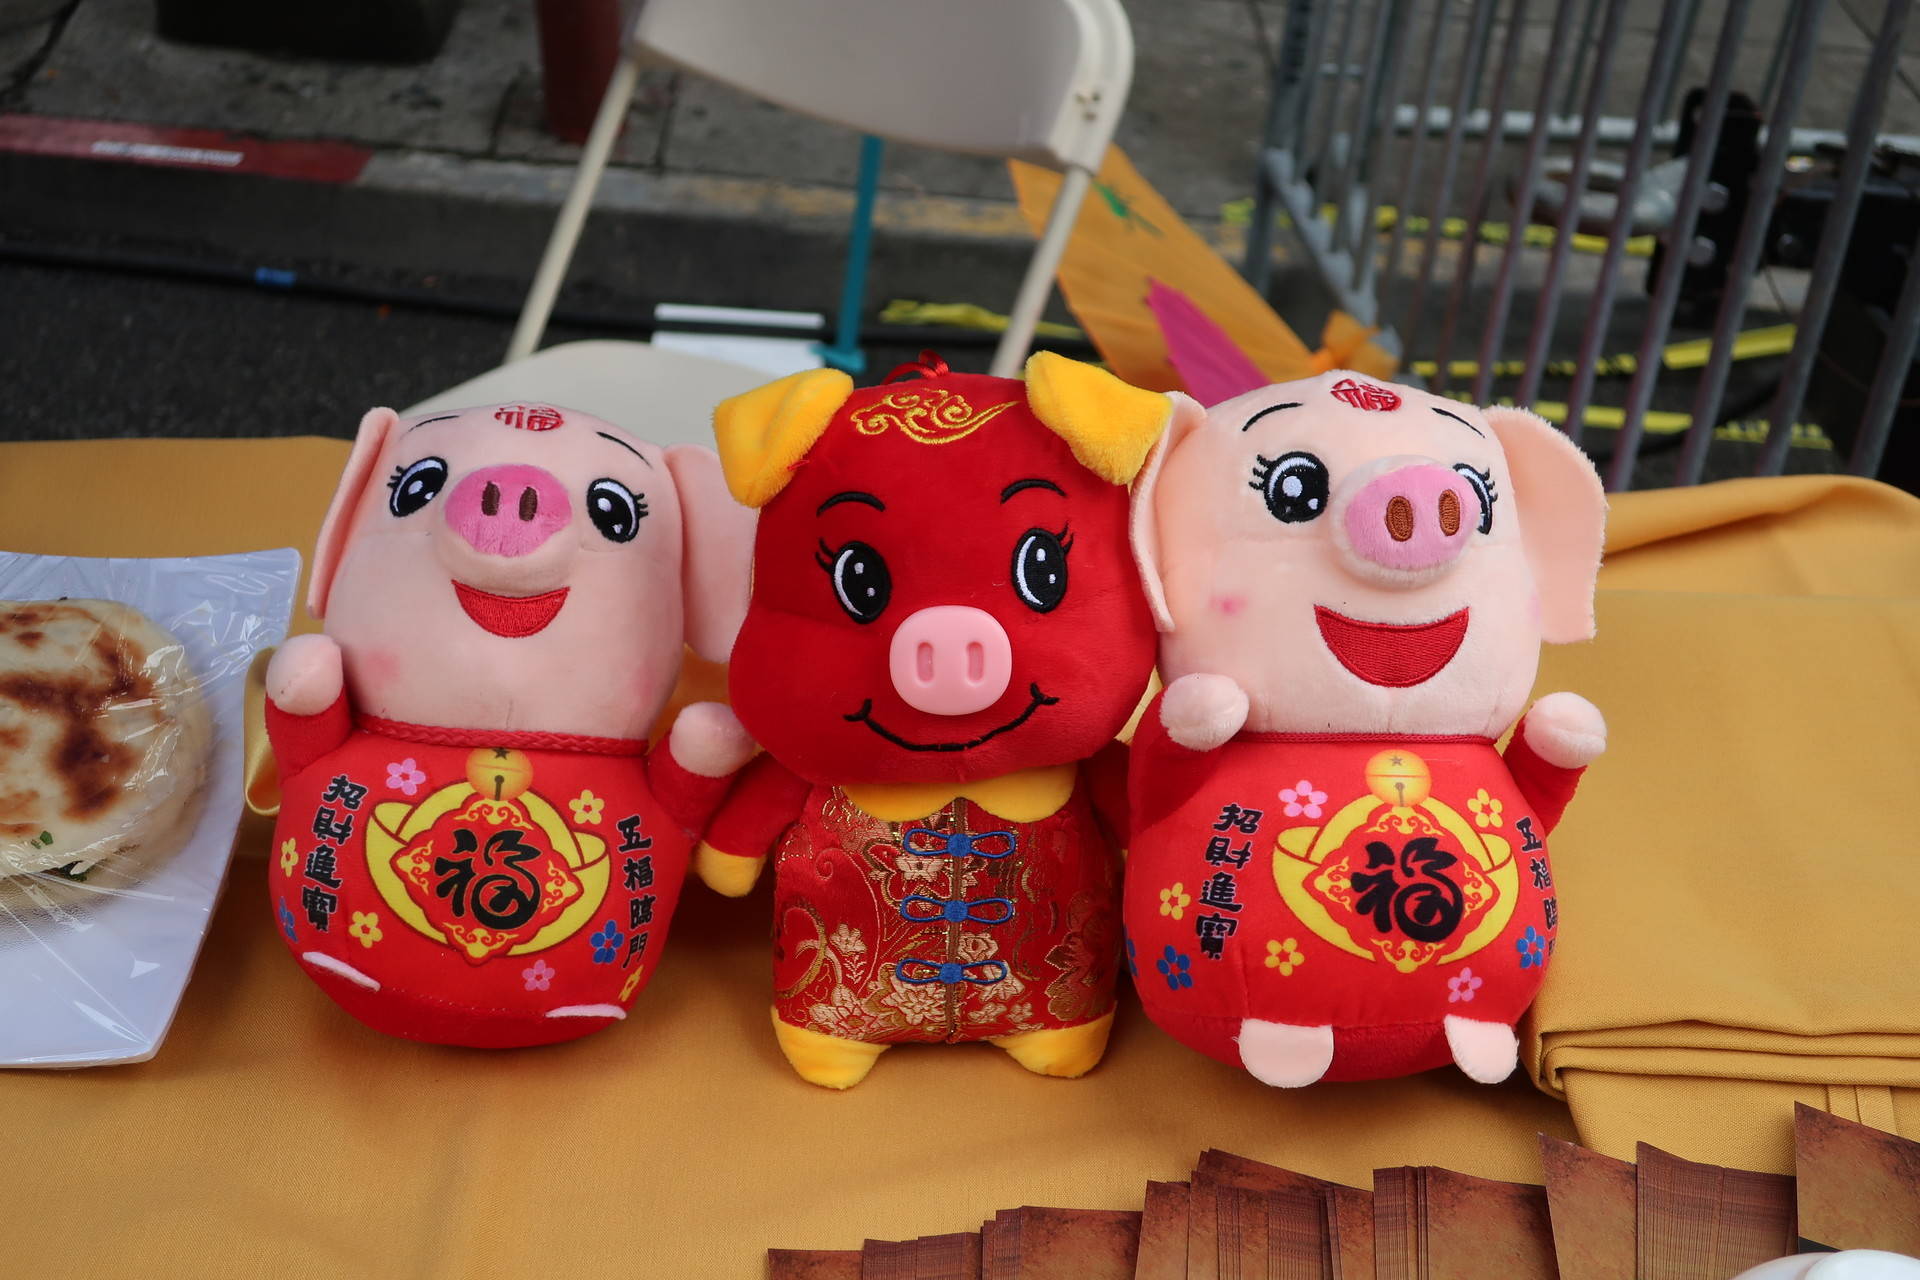 2019 is the Year of the Pig, which signifies prosperity and wealth.  Michelle Wiley/KQED